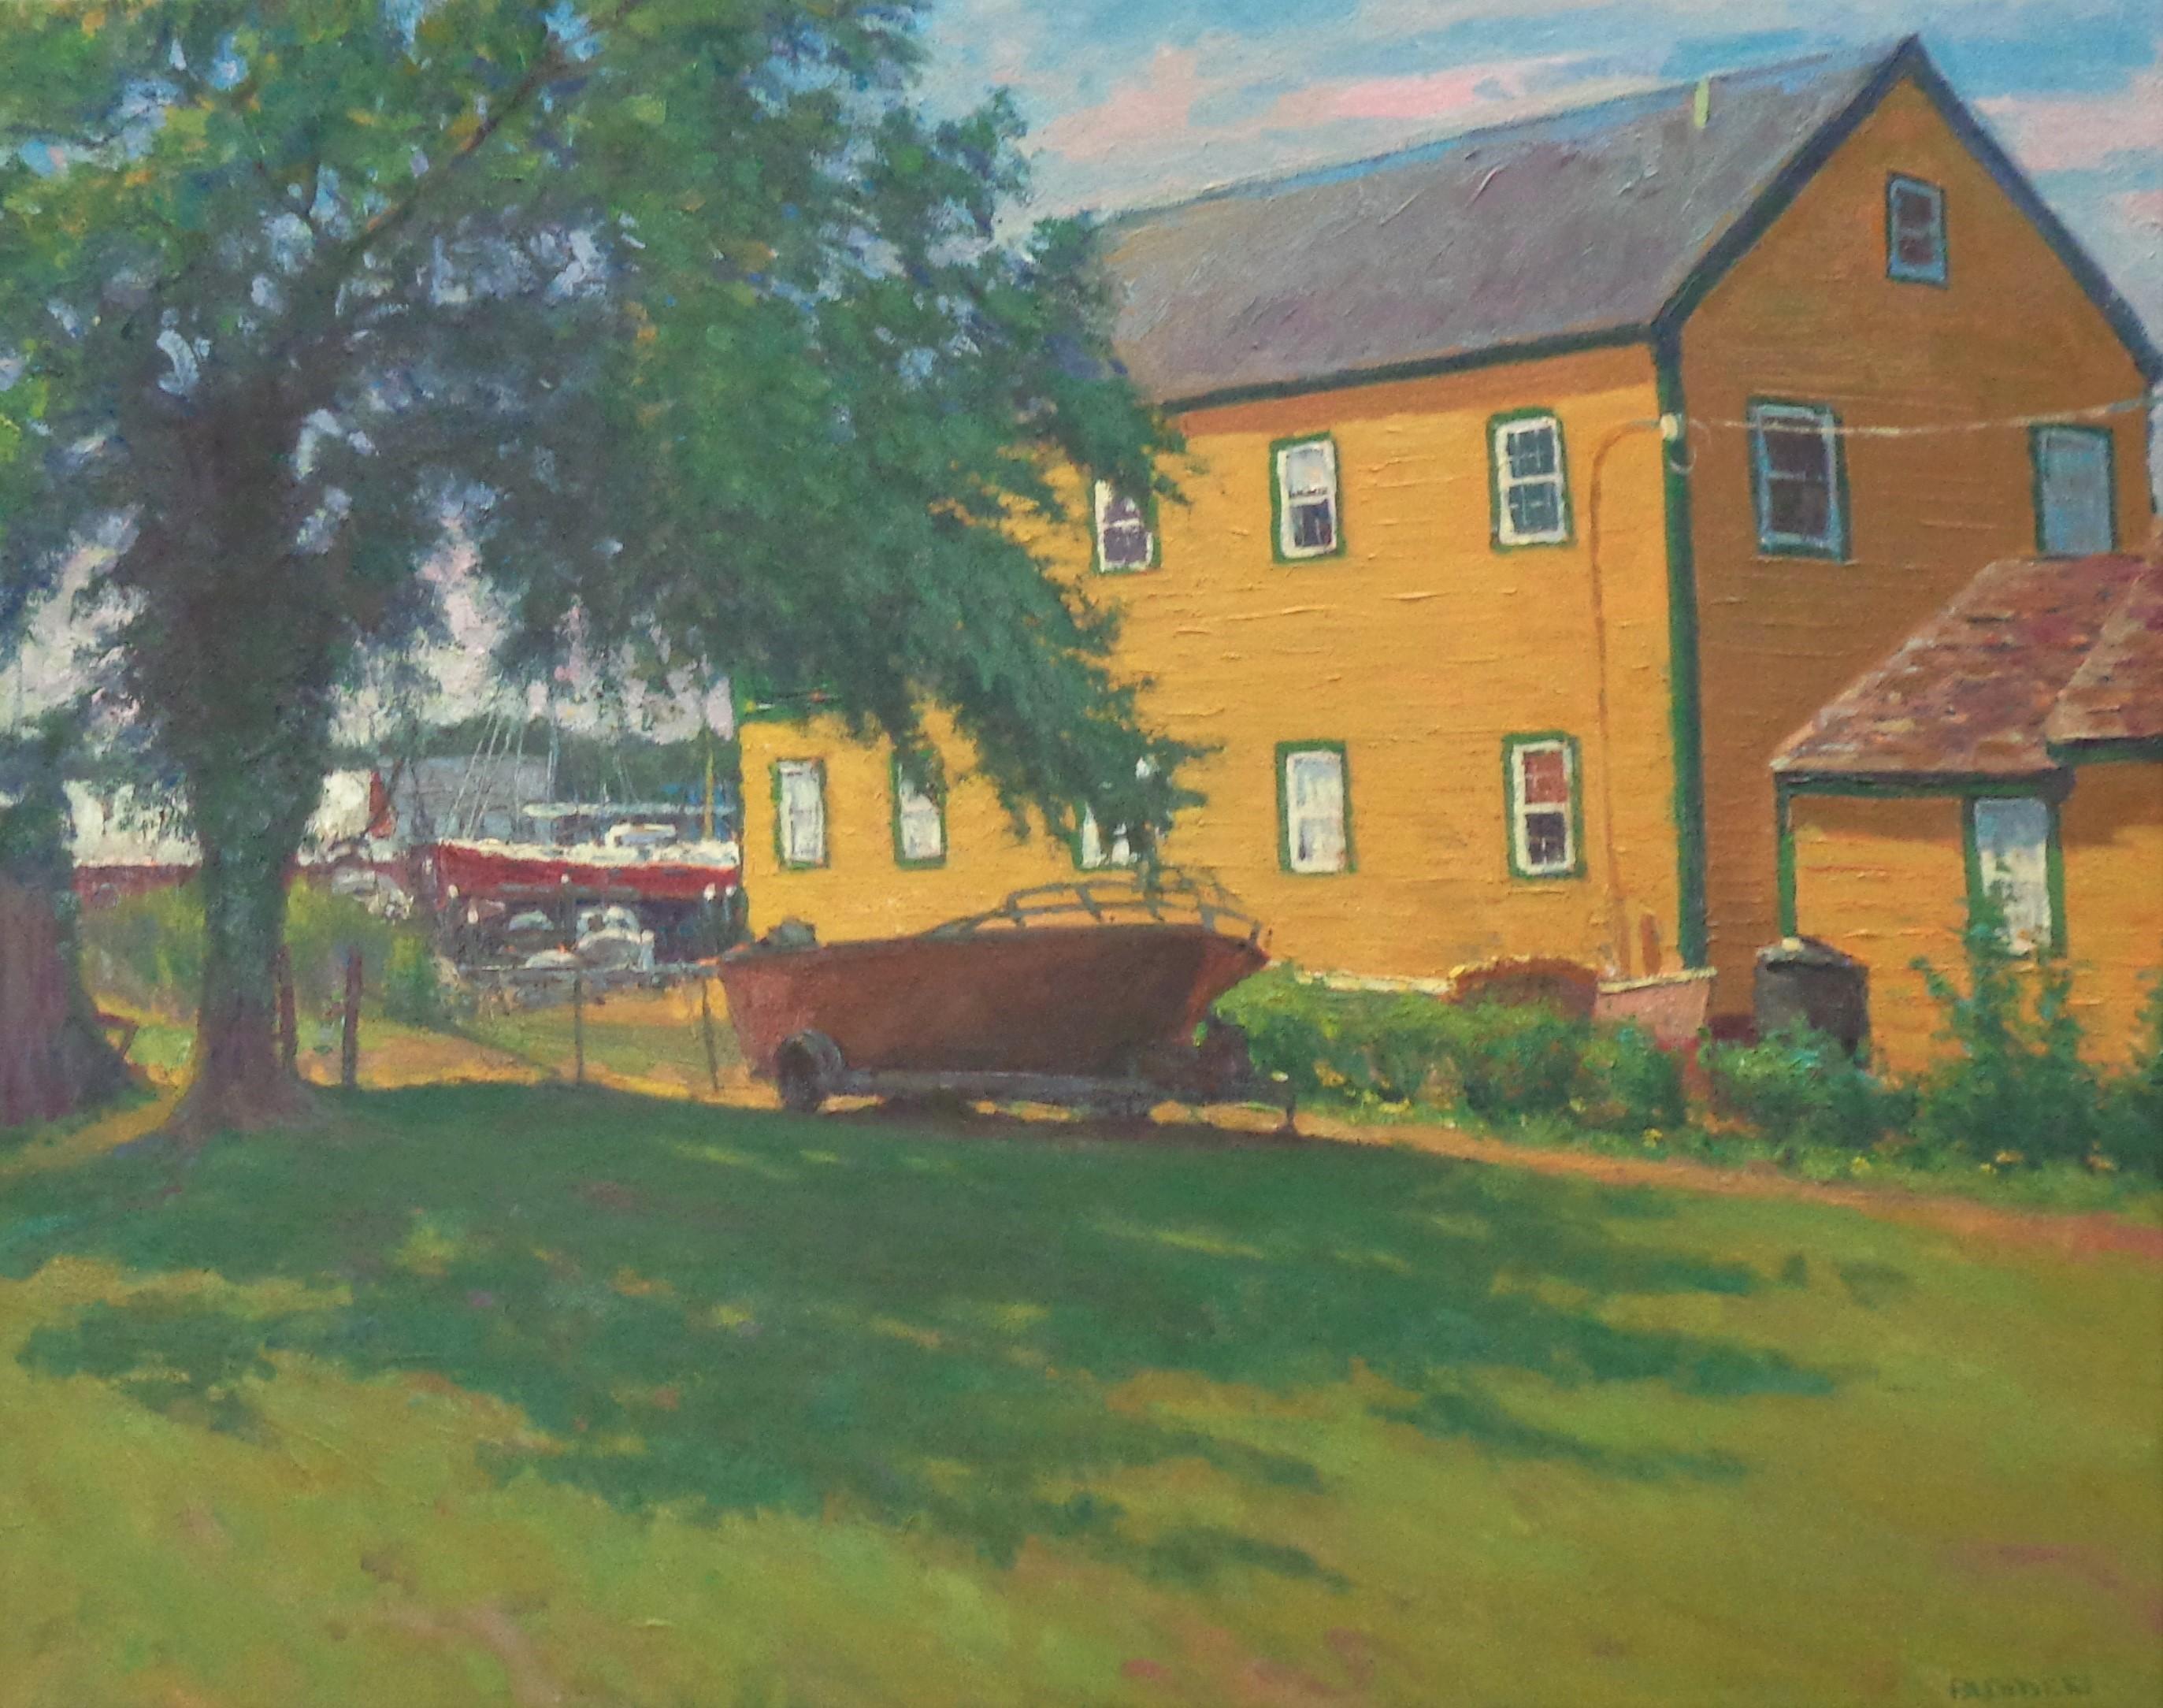 Summer In Oxford is a beautiful  oil painting on canvas by award winning contemporary artist Michael Budden that displays the very essence of plein air painting and represents one of the largest plein air paintings he has completed to date. This